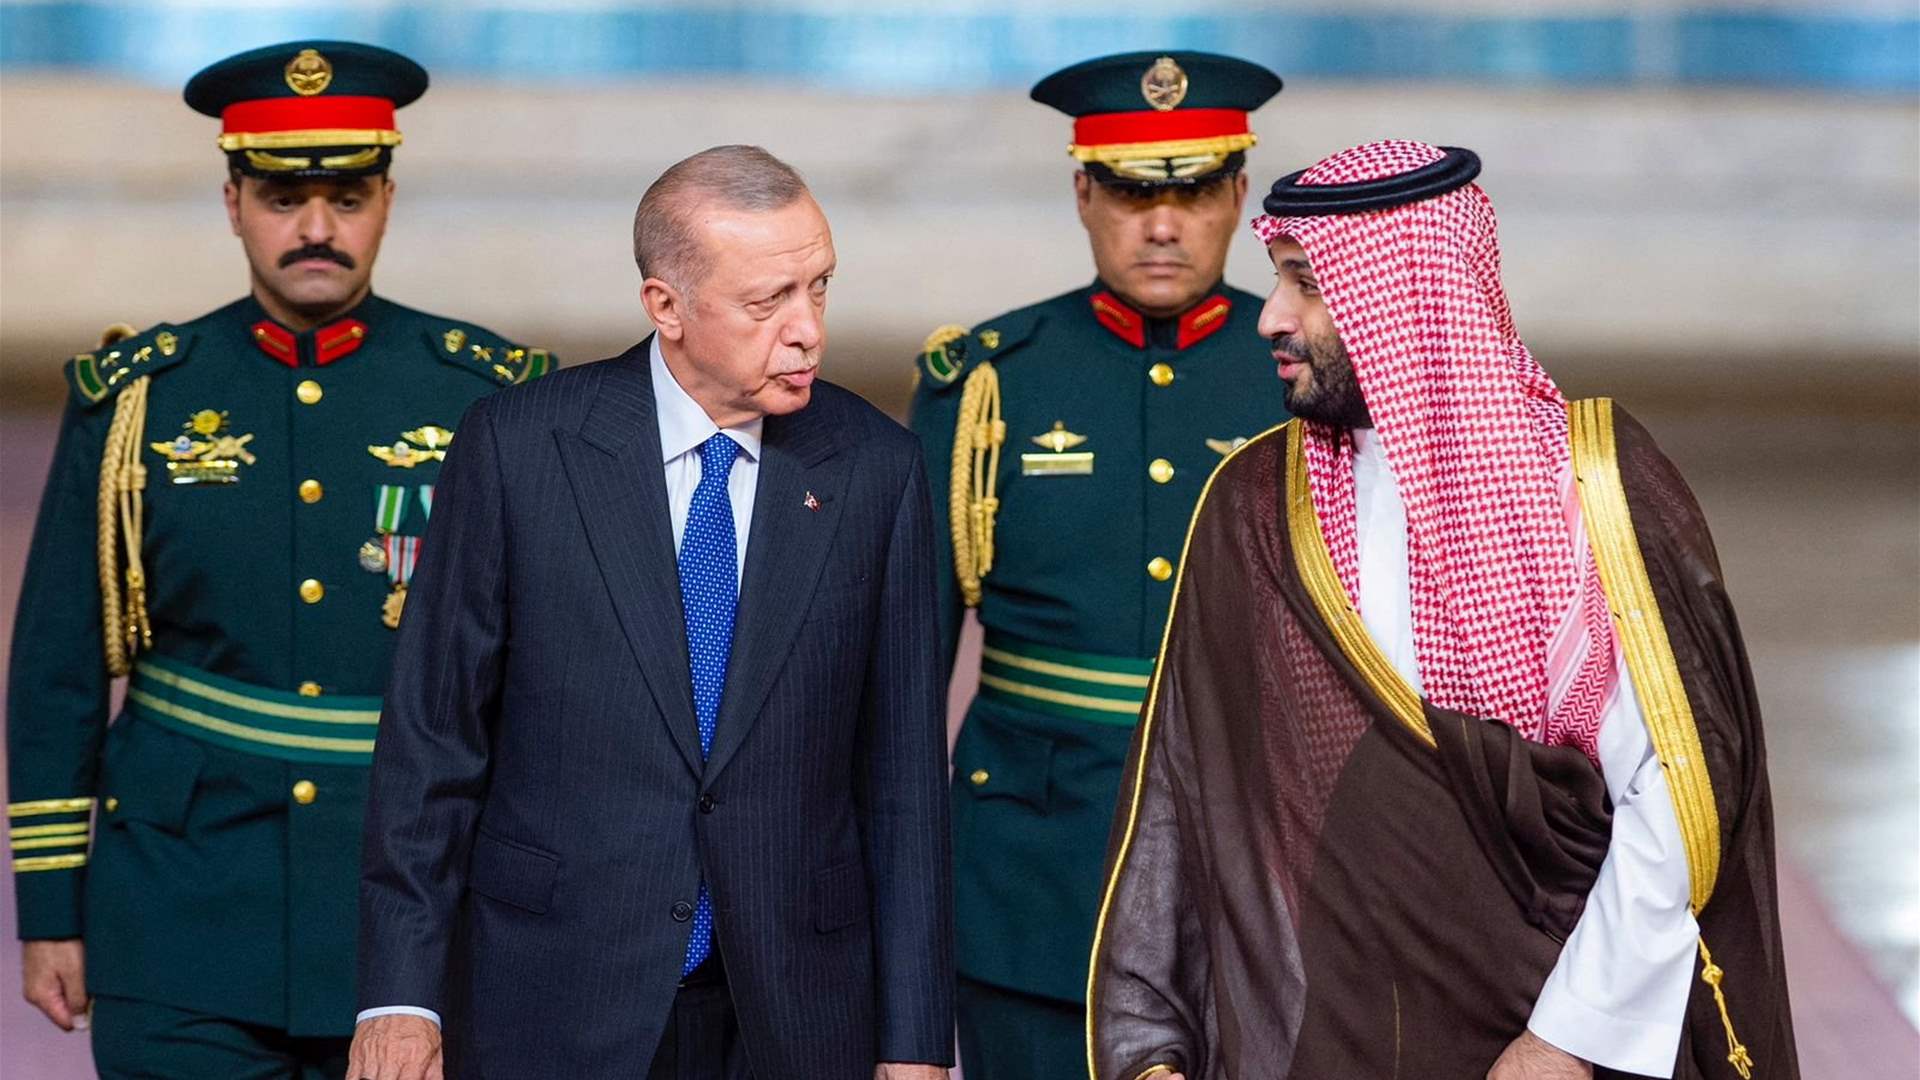 Saudi Arabia and Turkey sign investment and defense agreements during Erdogan visit